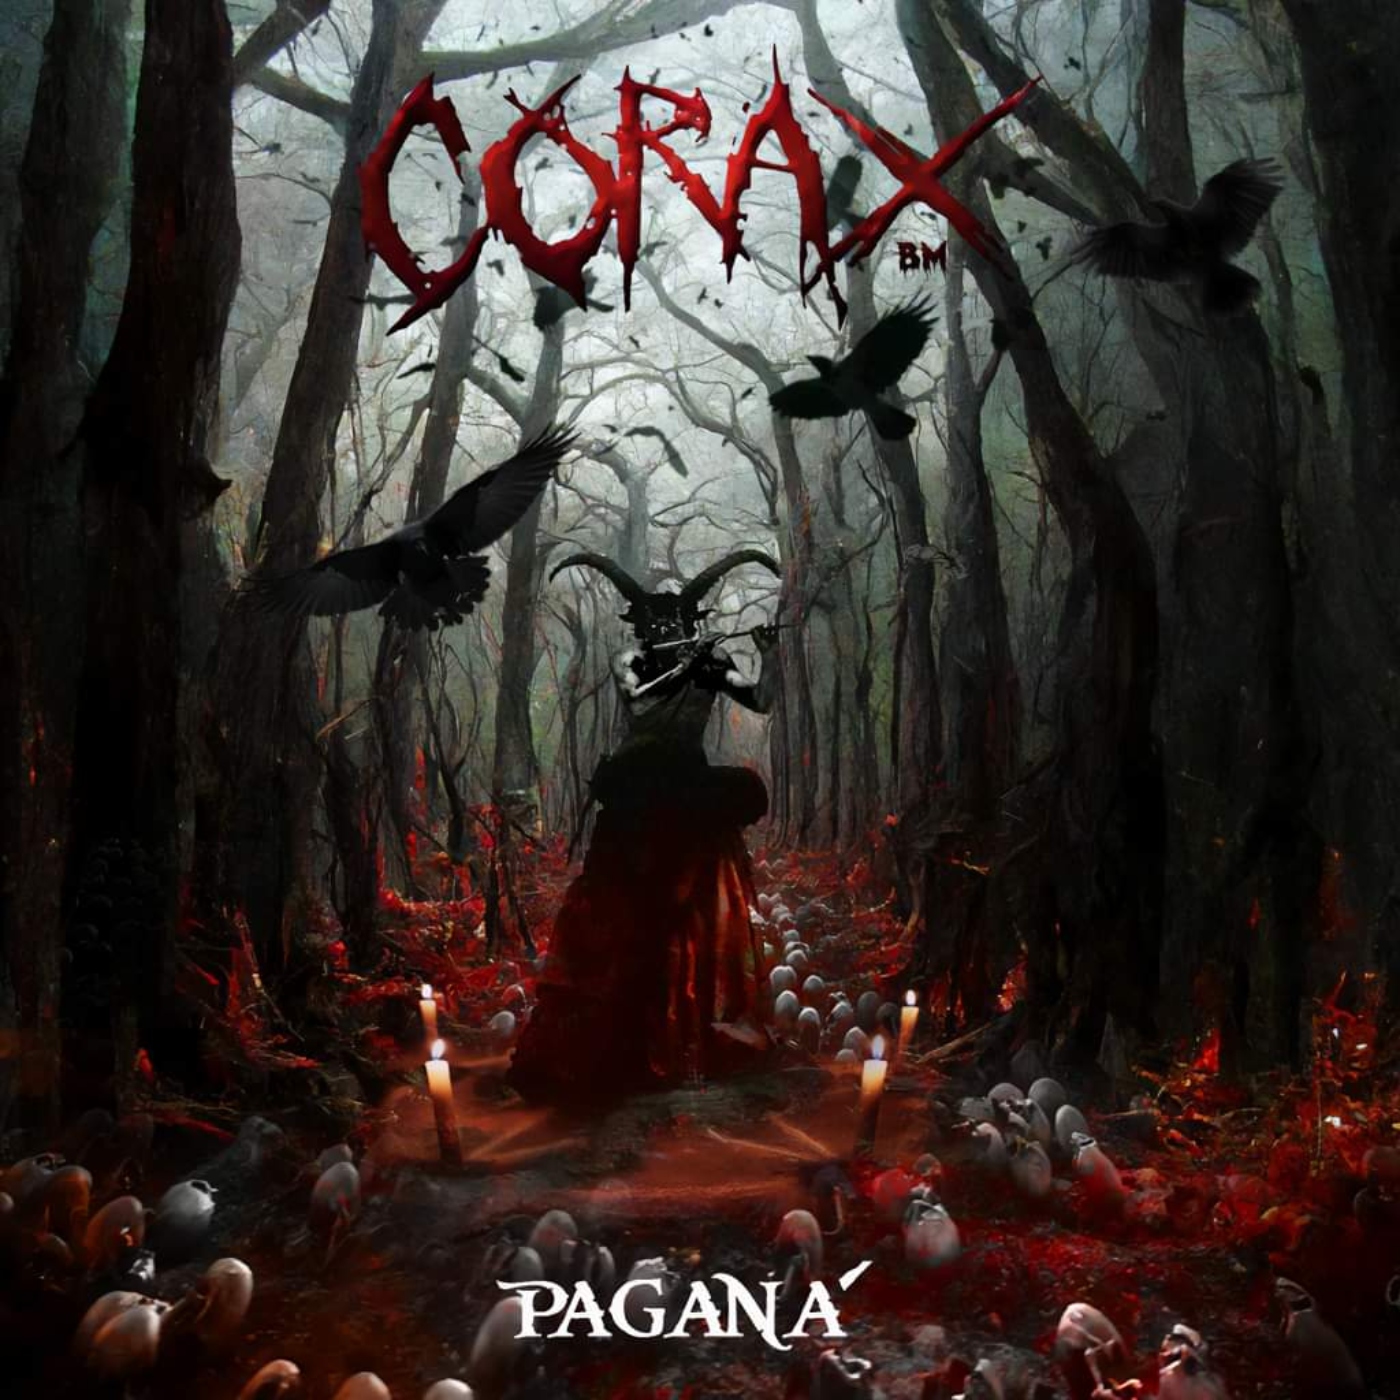 You are currently viewing Corax B.M. – Pagana (CD, LP, Tape, Digital, Merch) Out today!